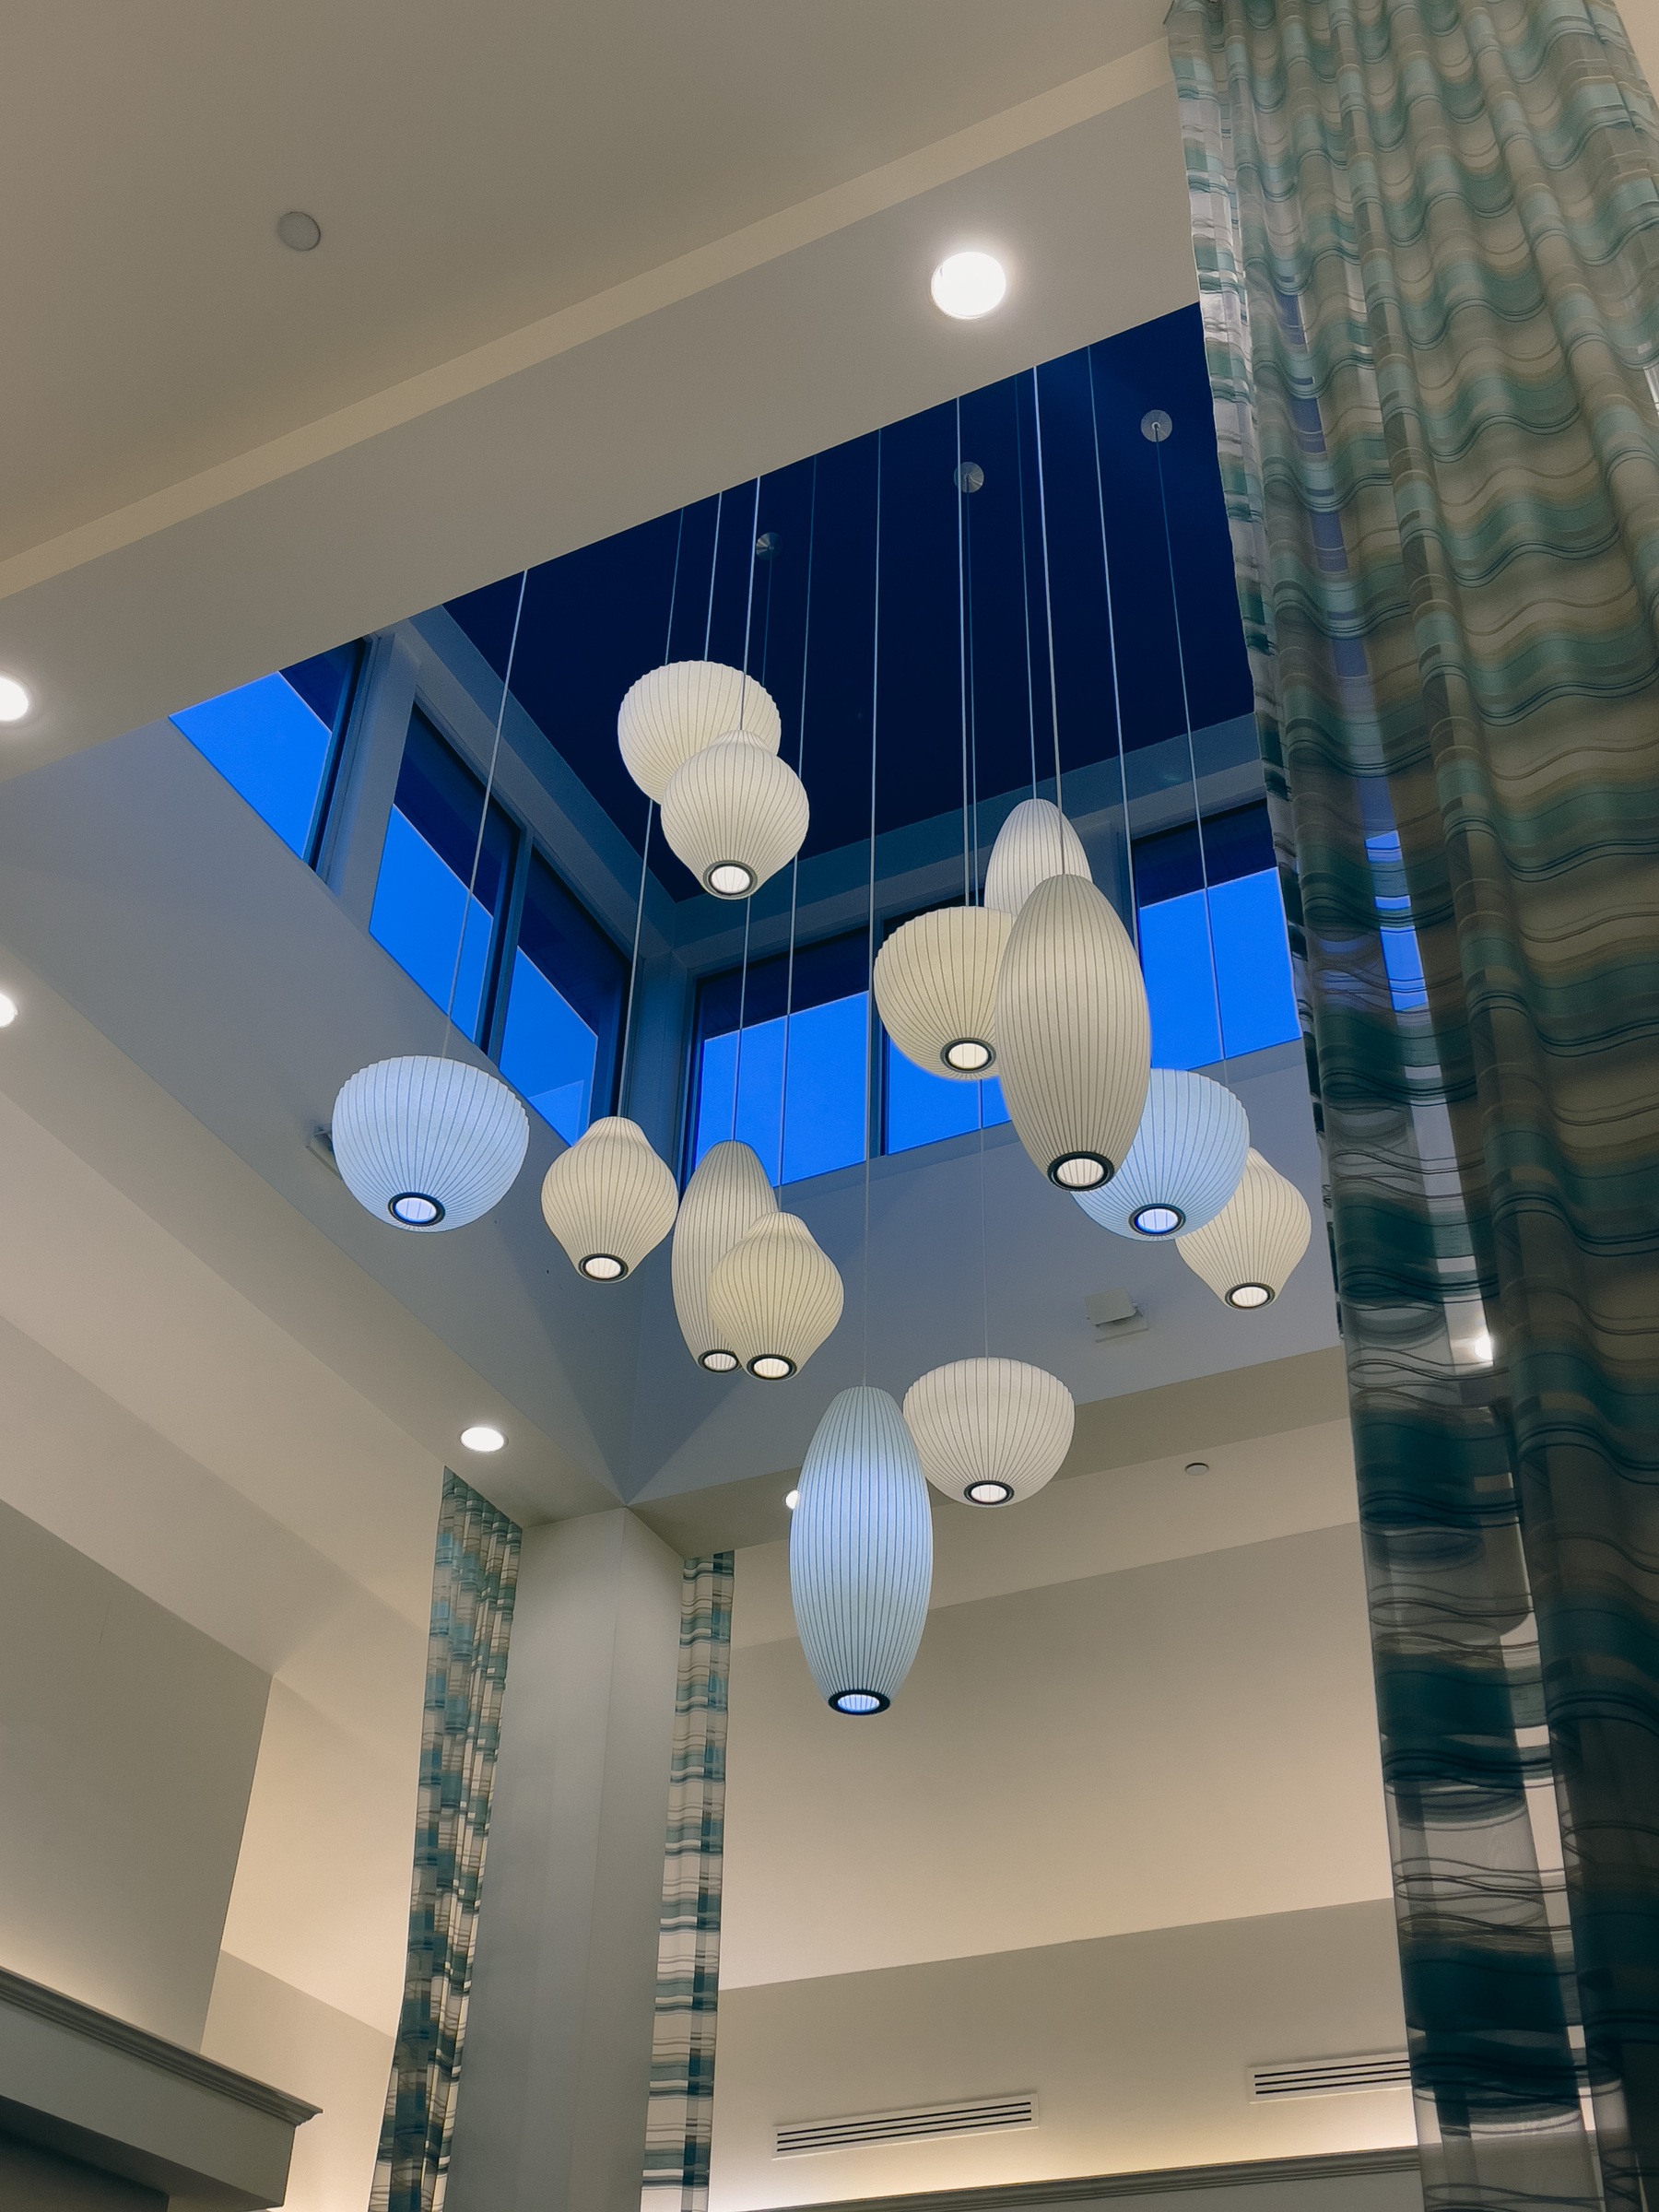 Pendant light fixtures in a soaring hotel lobby.